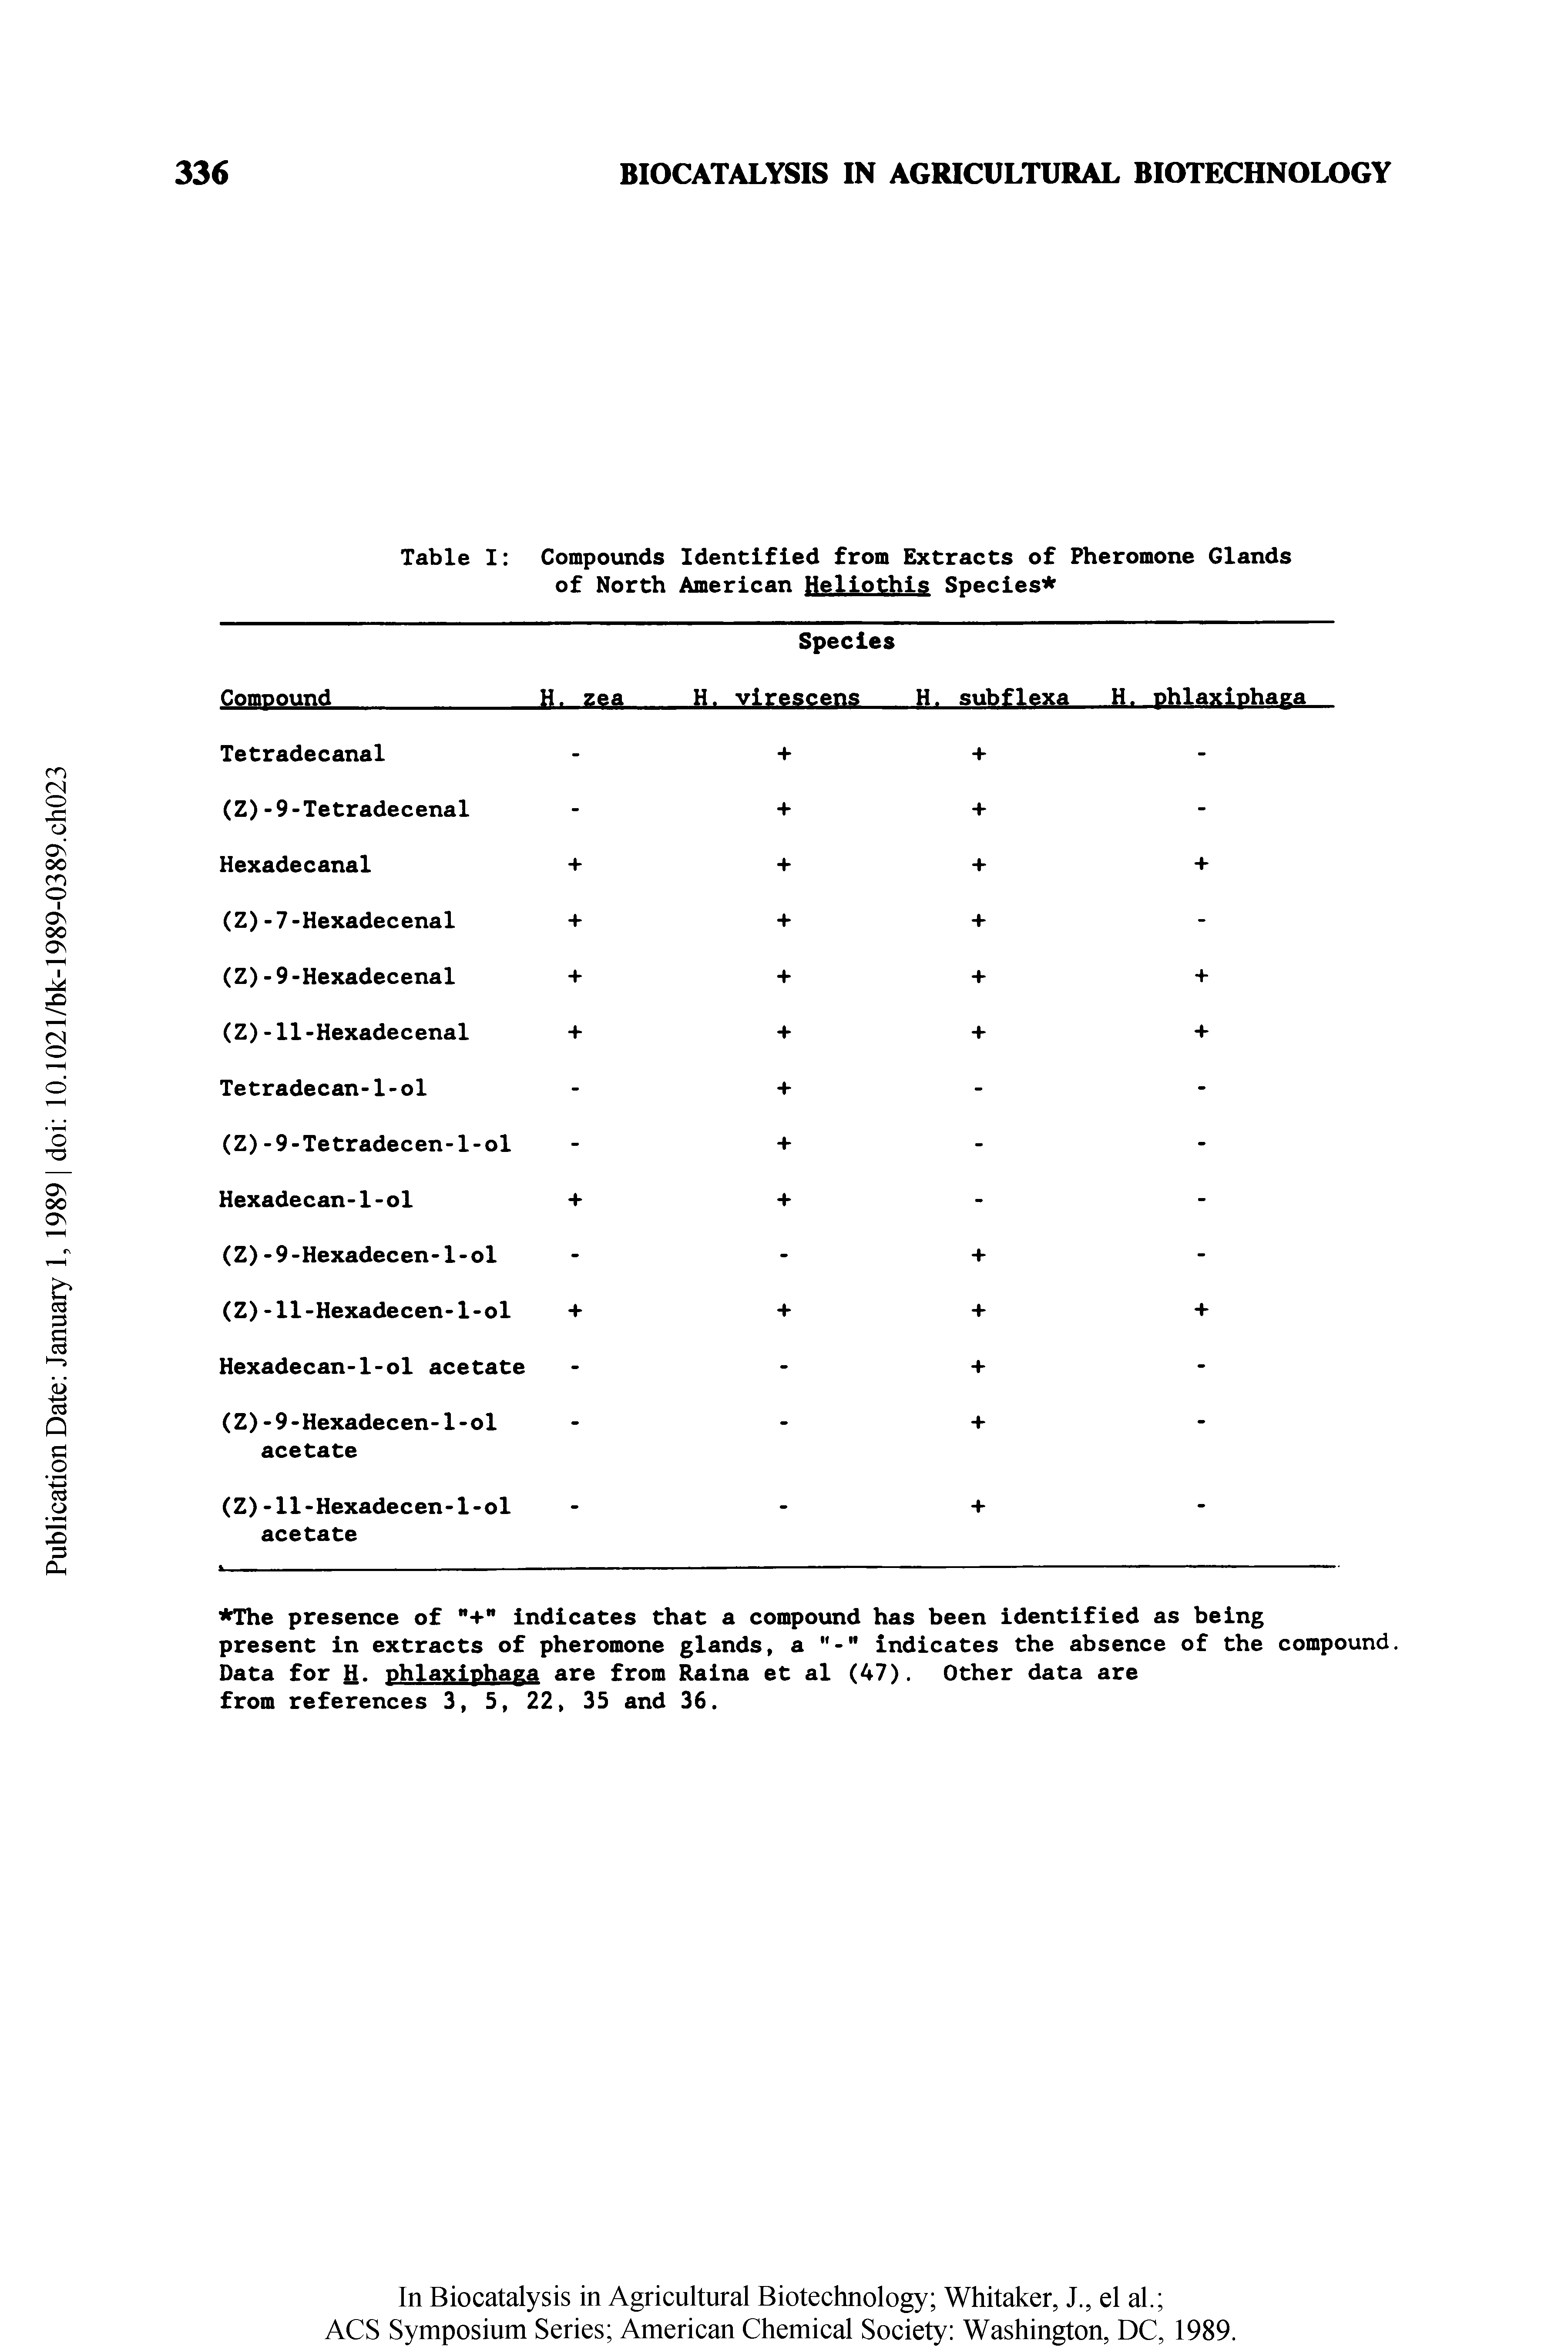 Table I Compounds Identified from Extracts of Pheromone Glands of North American Heliothis Species ...